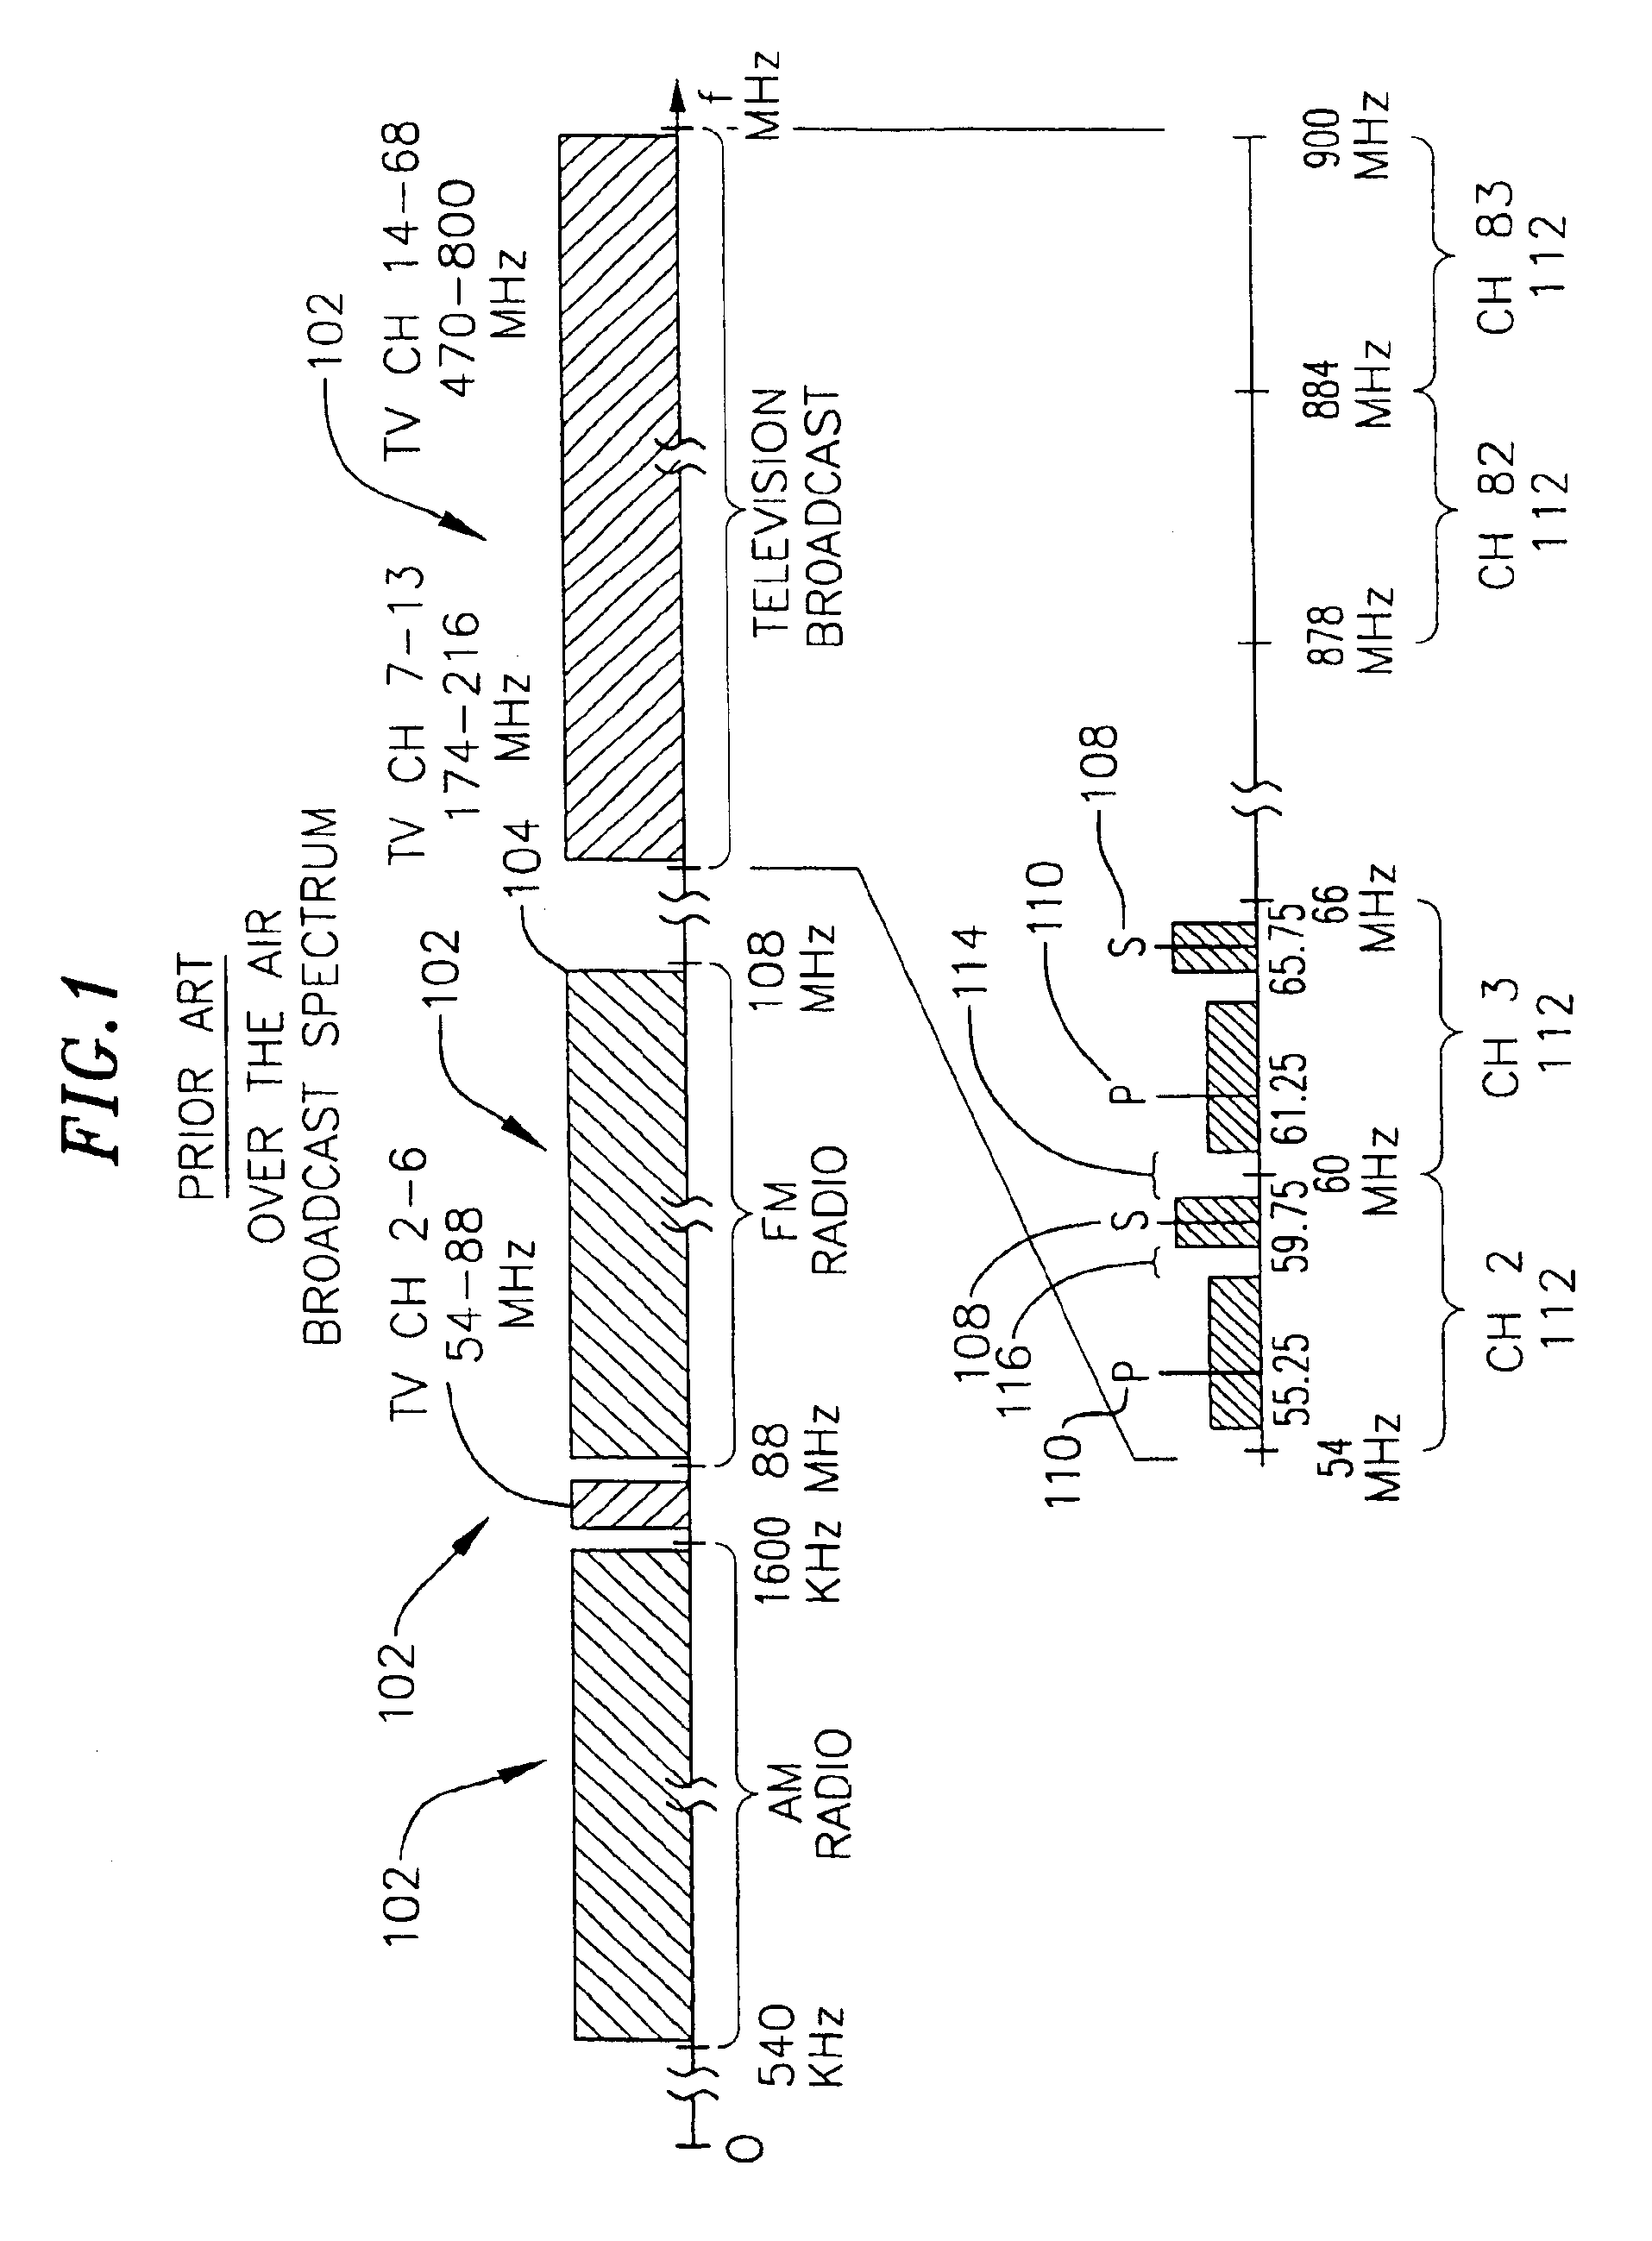 Multi-track integrated spiral inductor